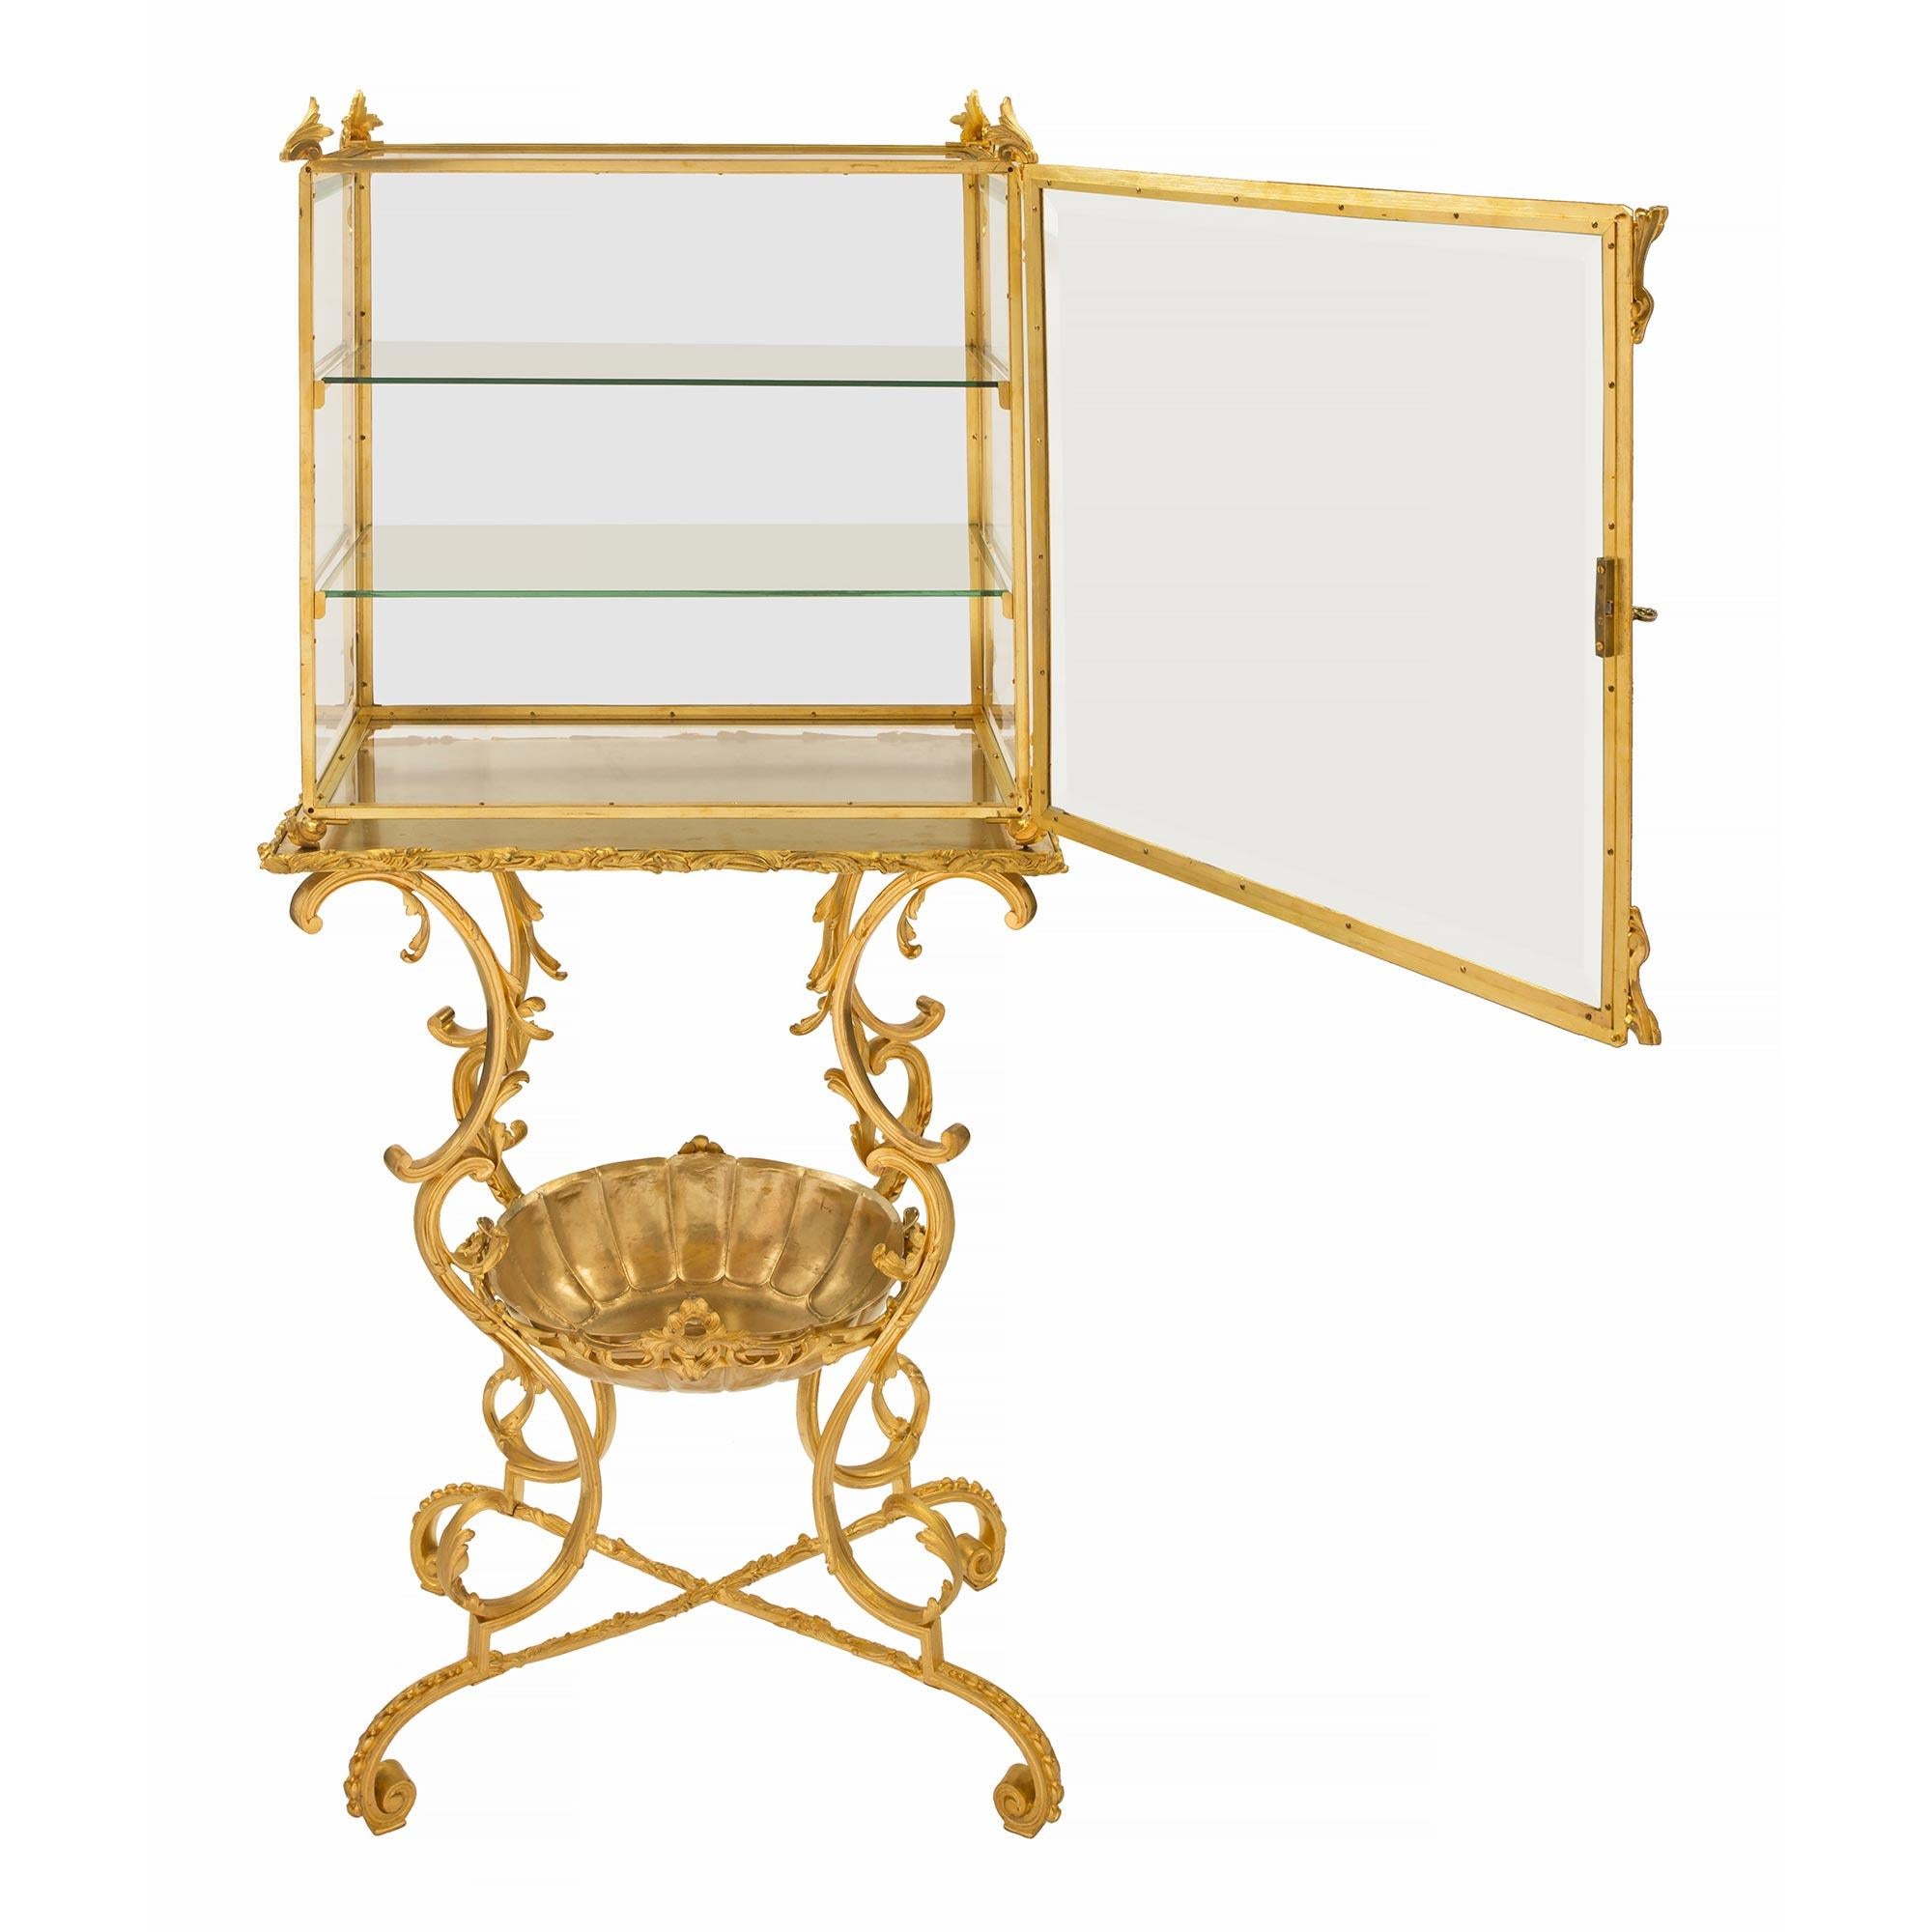 A striking and most unique French 19th century Louis XIV st. ormolu and glass display vitrine. The vitrine is raised by fine scrolled beaded feet joined by an X stretcher. The base displays a most decorative and superbly curved design with scrolled